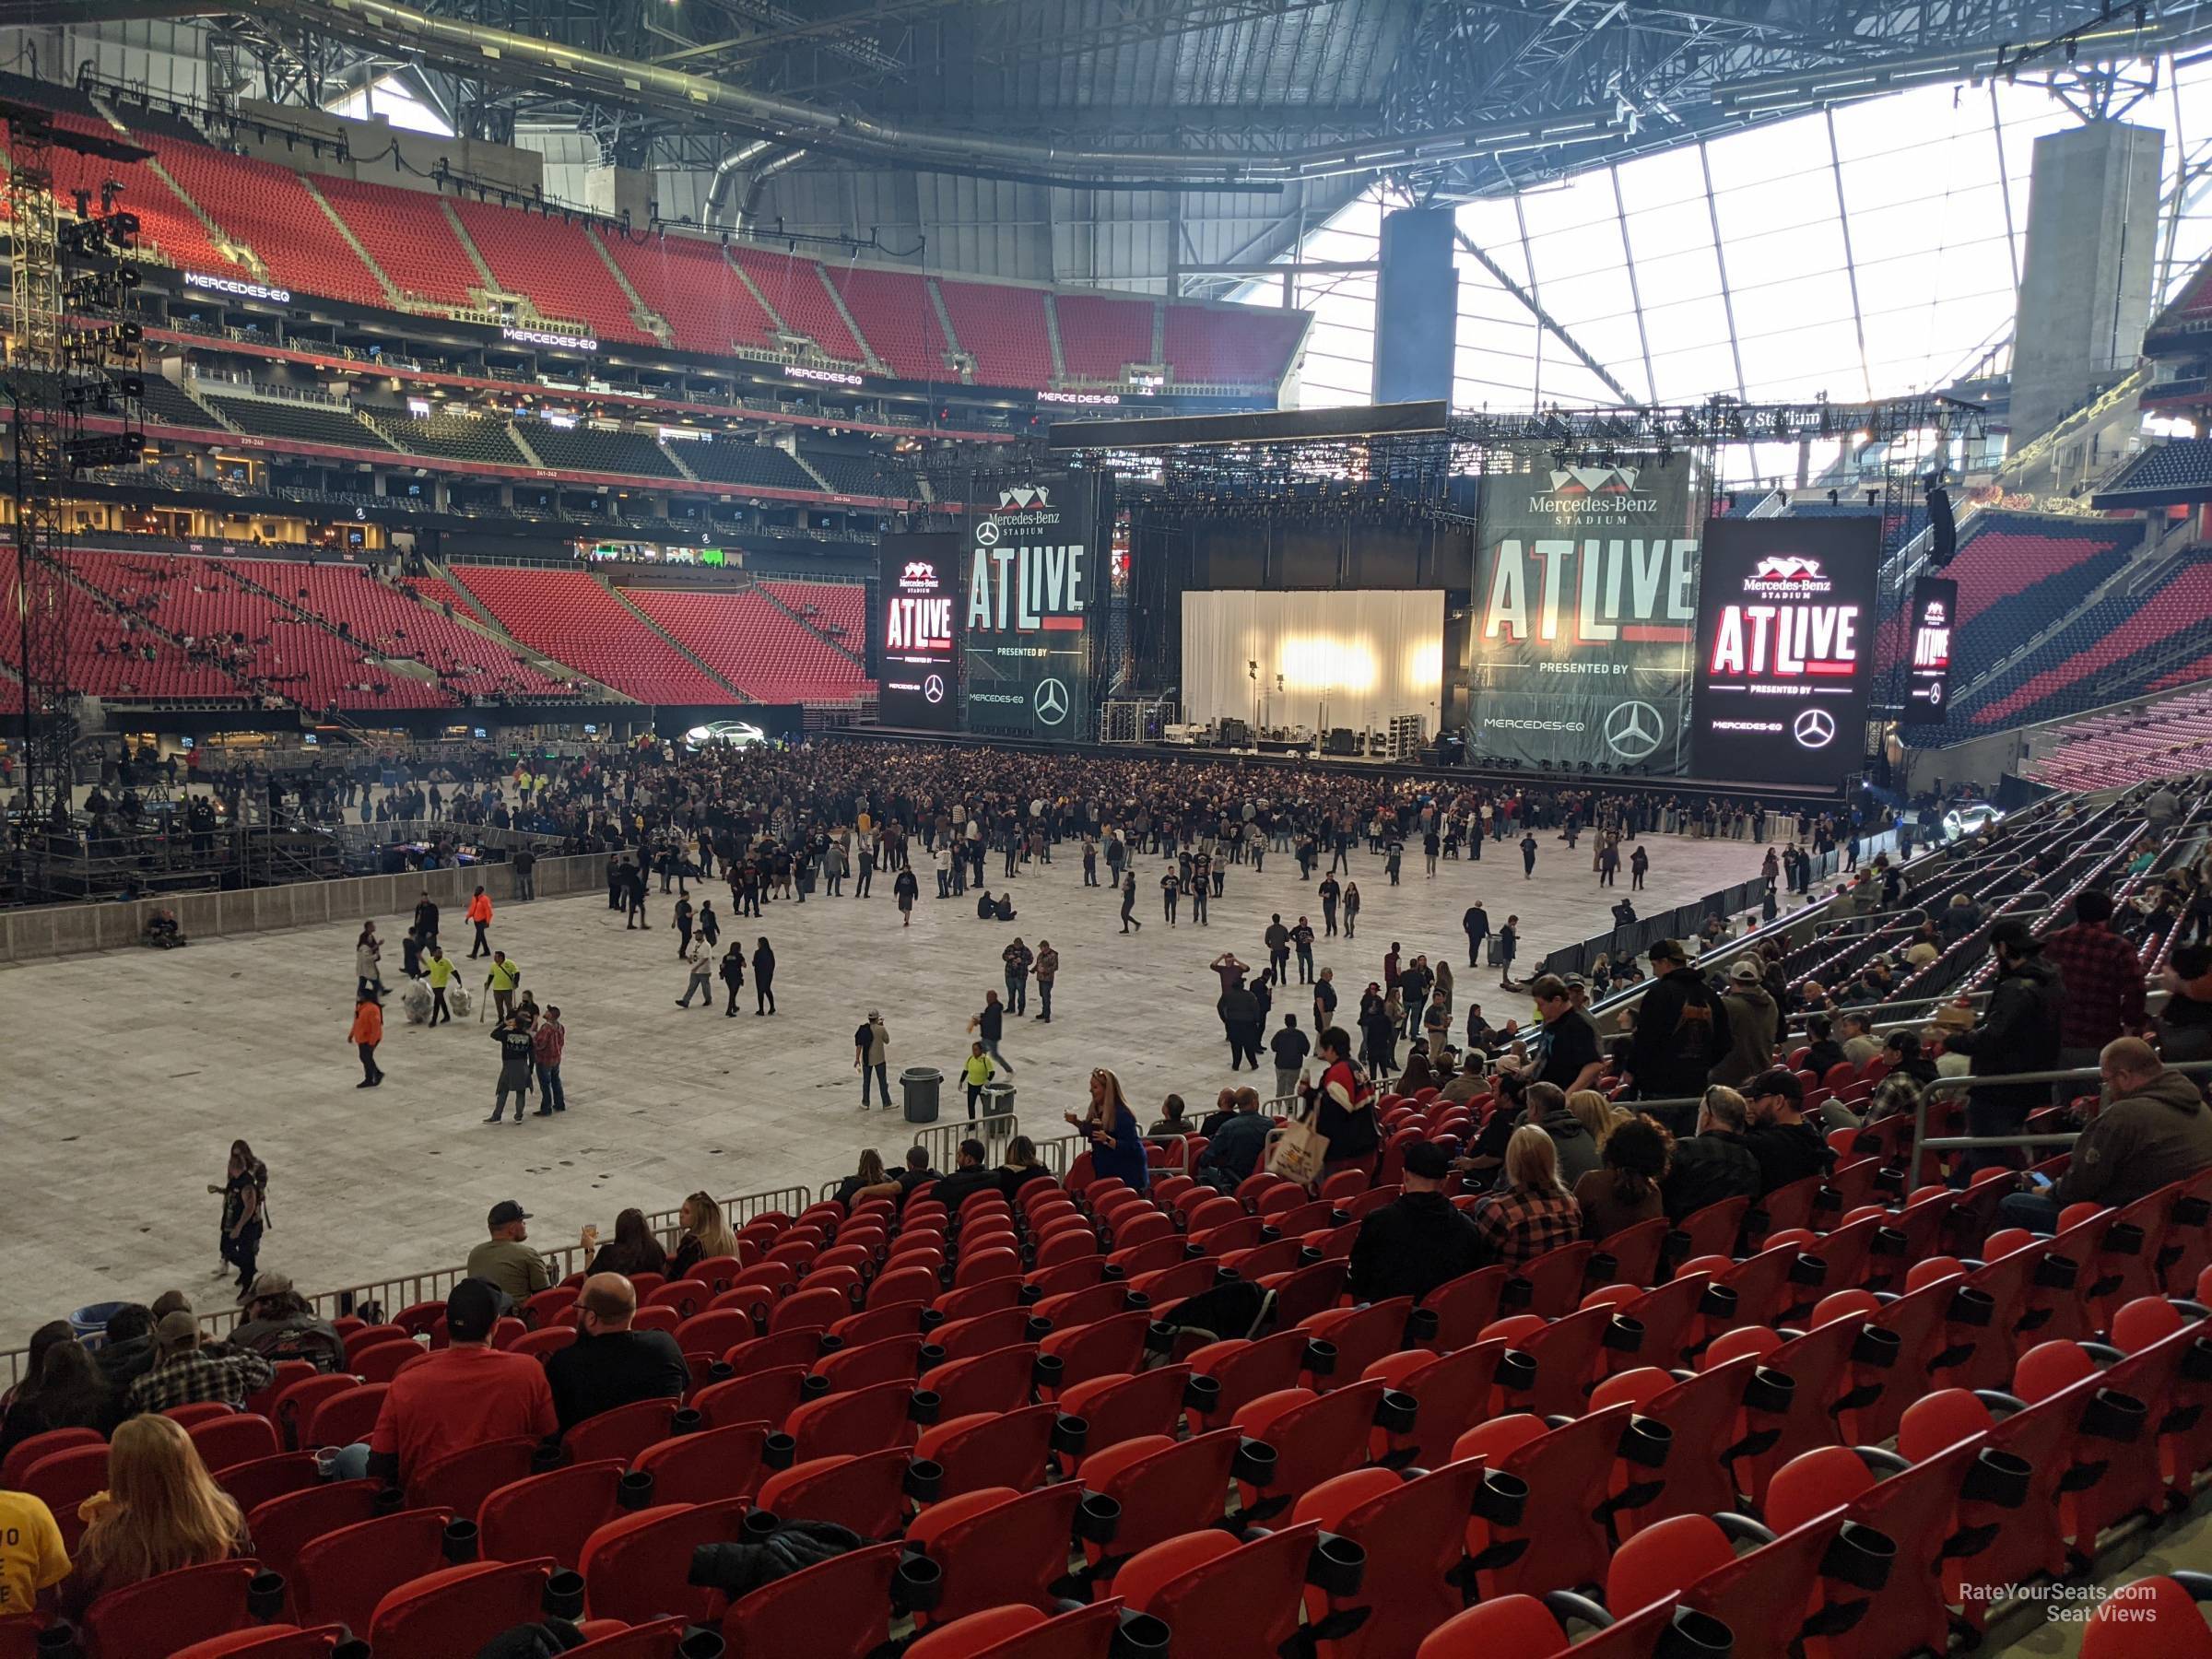 section 114, row 23 seat view  for concert - mercedes-benz stadium